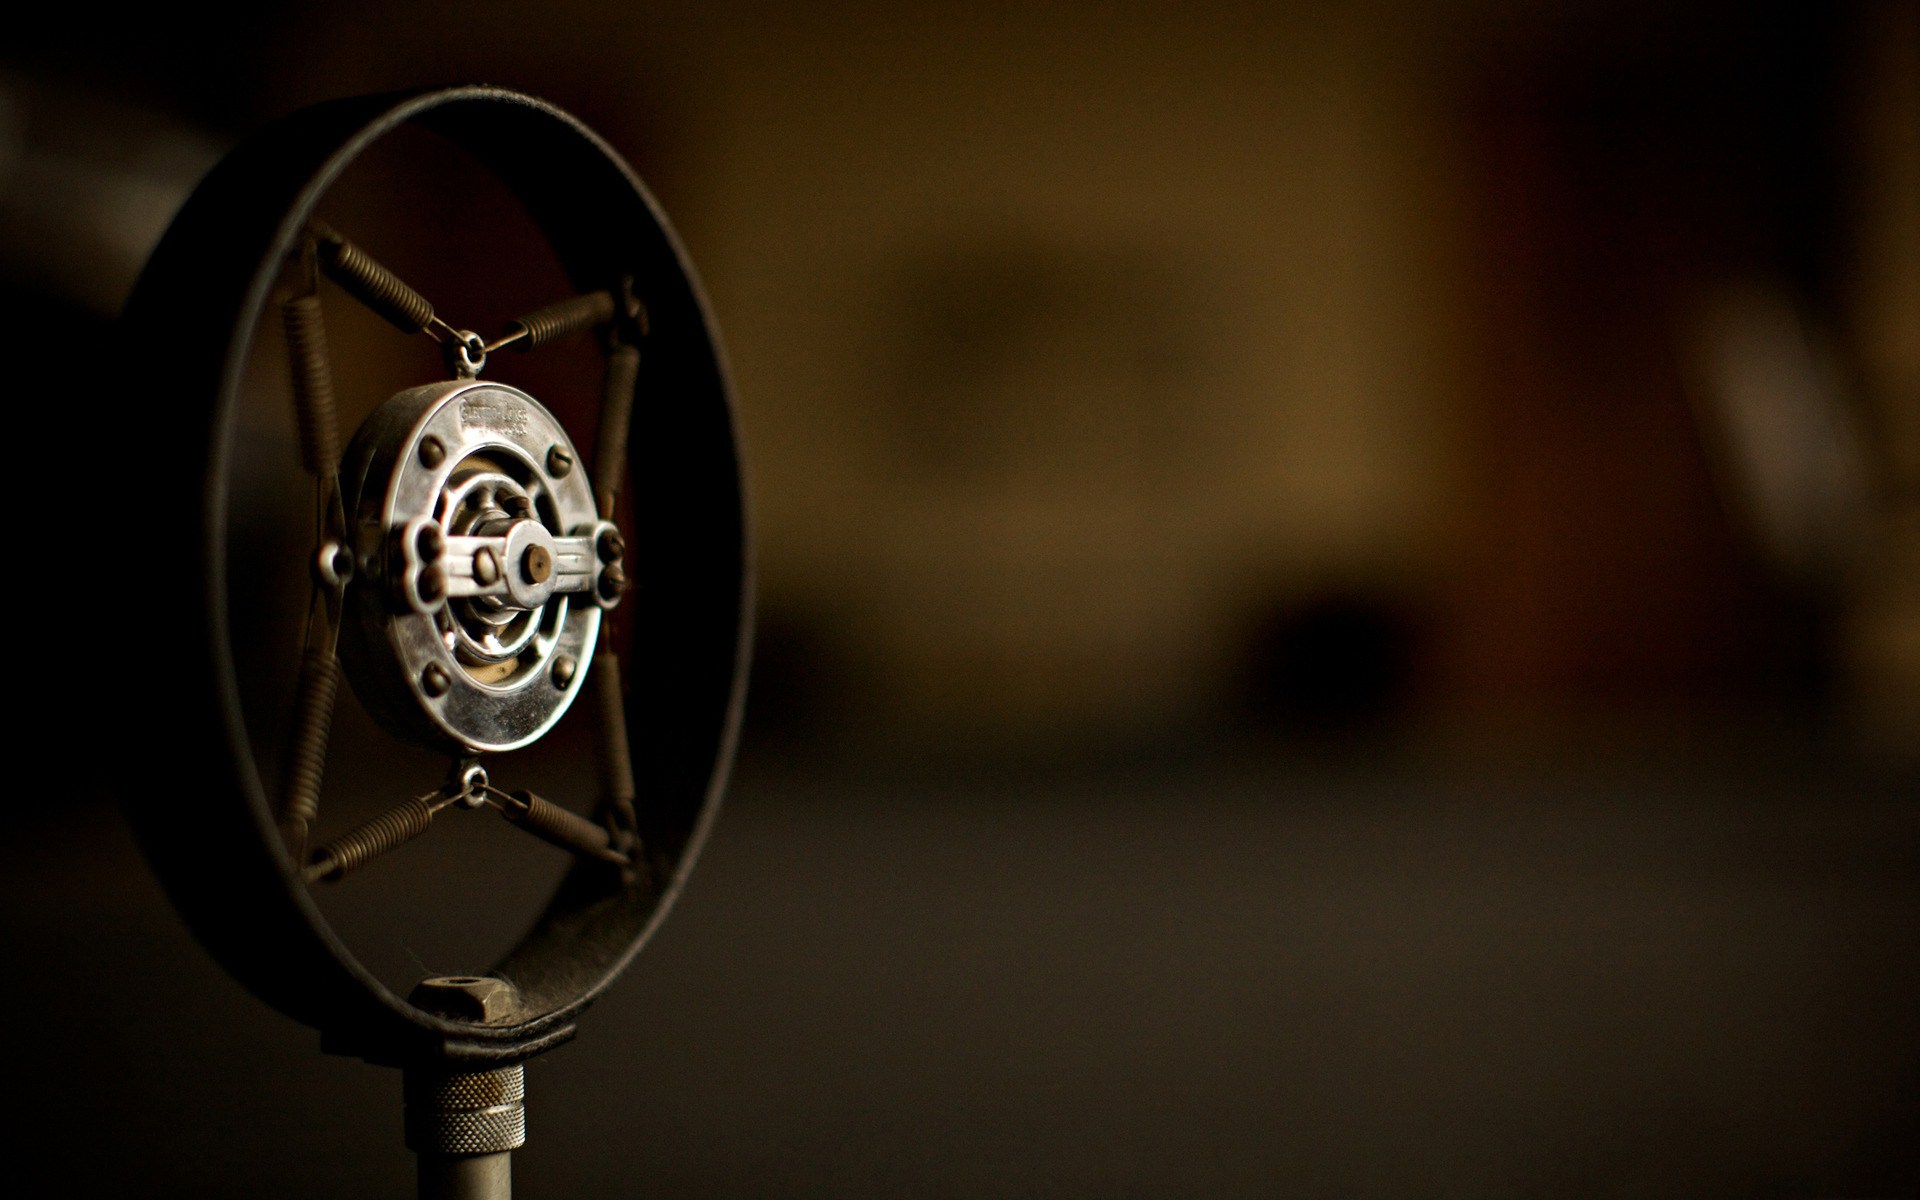 microphone wallpaper,microphone,audio equipment,light,photography,technology